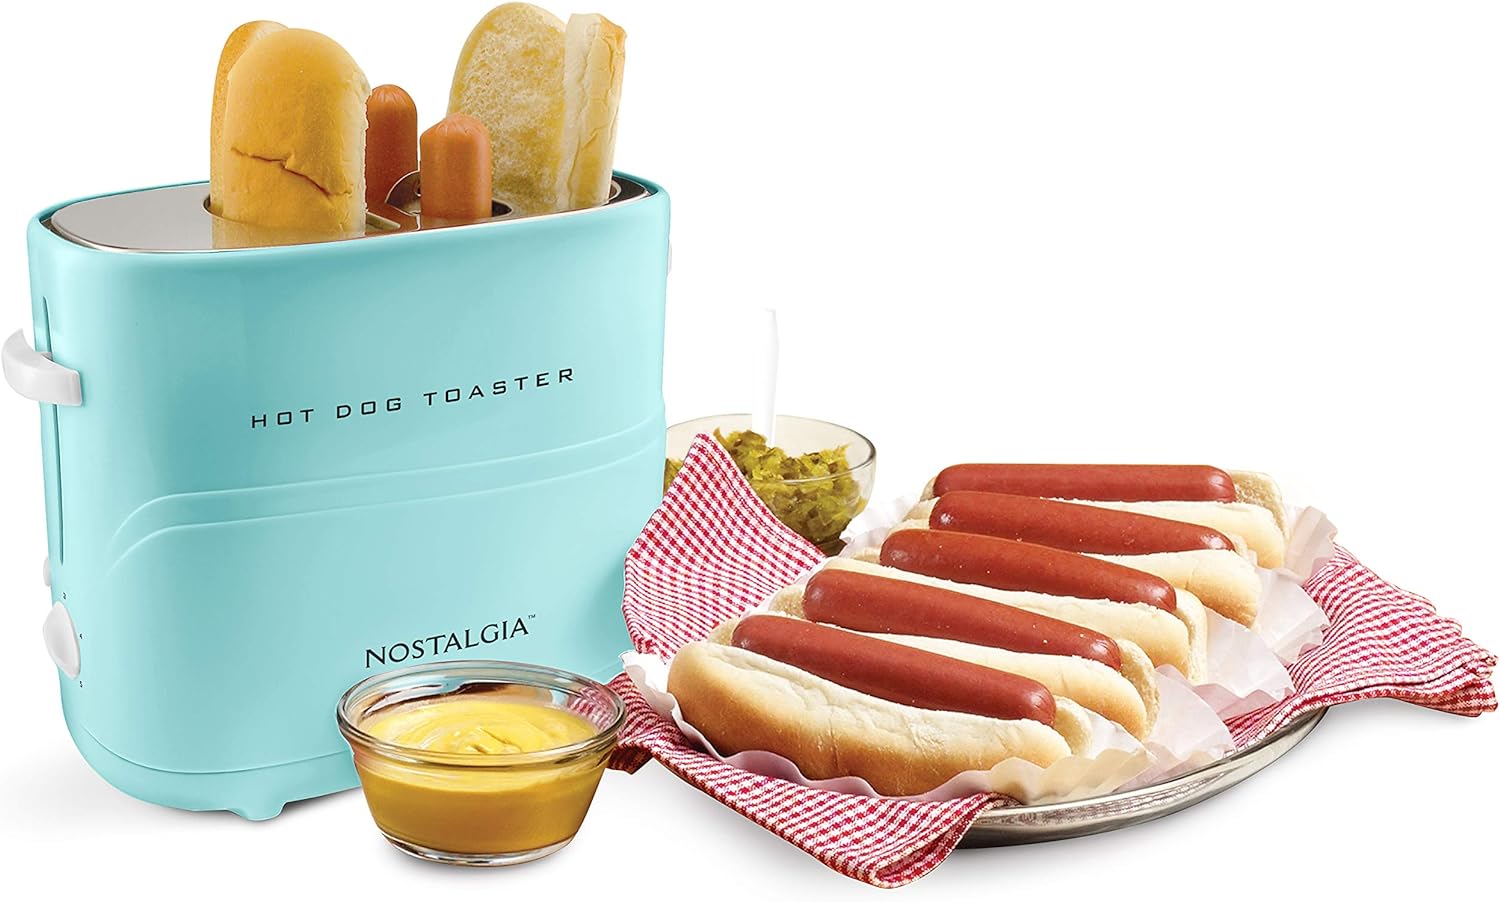 How to Choose Hot Dog Toaster